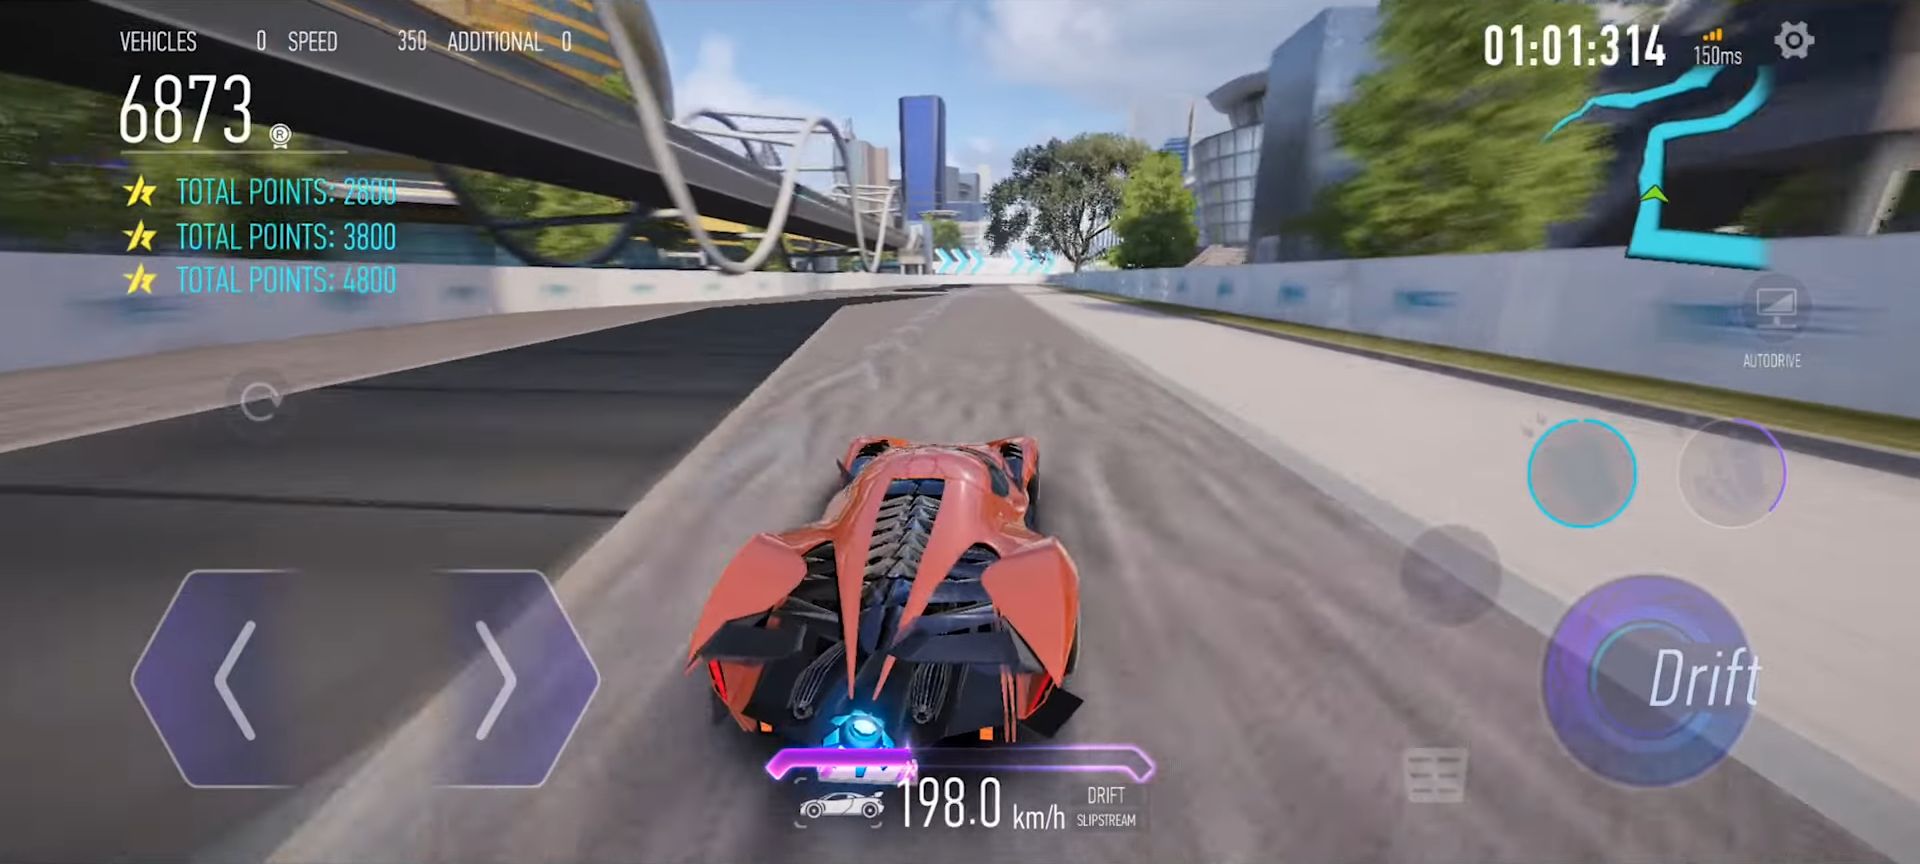 Ace Racer - Android game screenshots.